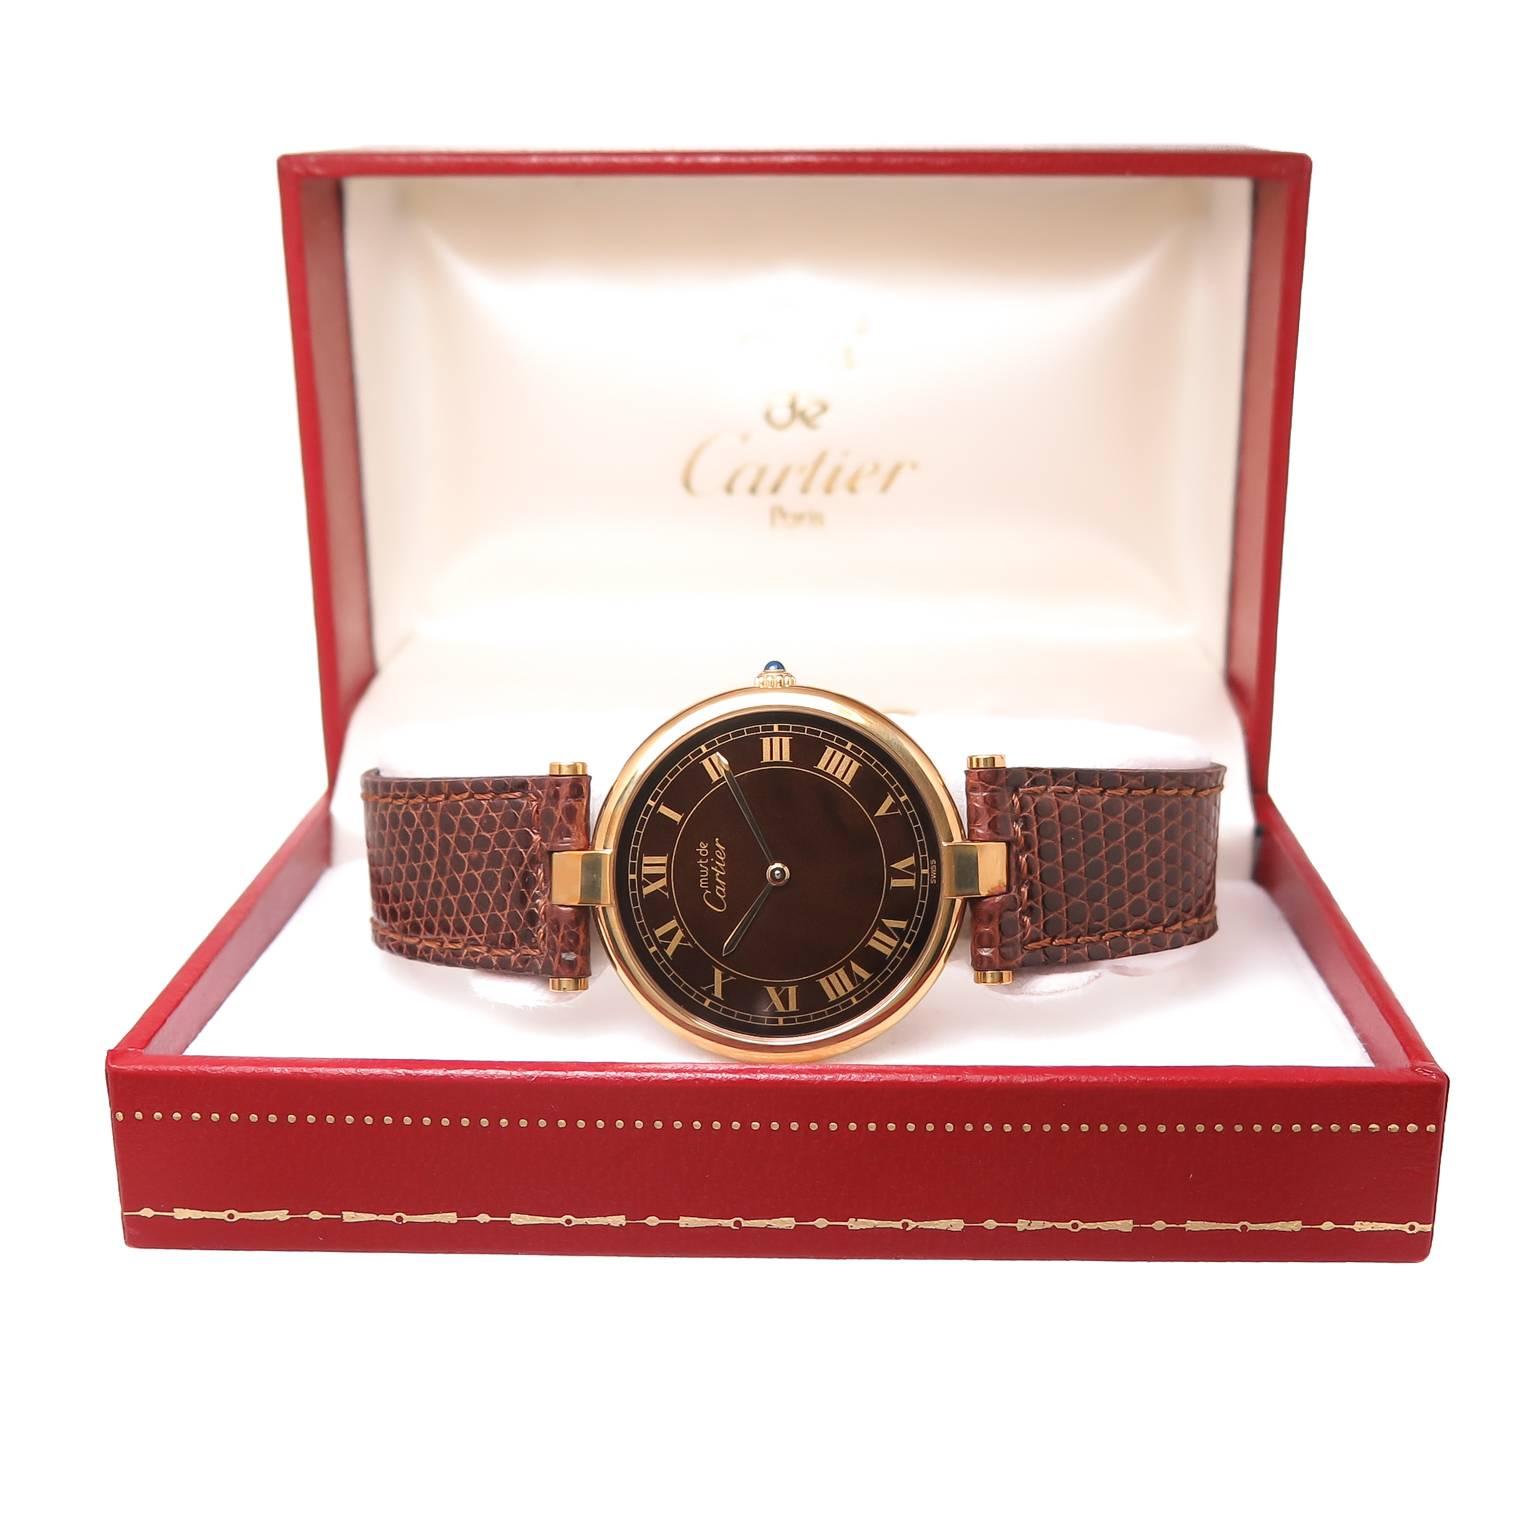 Circa 1990 Never Worn Cartier Vermeil ( Gold Plated Sterling Silver ) Vendome Collection Wrist Watch. 30 MM Water Resistant case, Quartz Movement, Brown Dial with Gold Roman Numerals, sapphire set Crown. Brown Cartier Lizard strap and a Vermeil